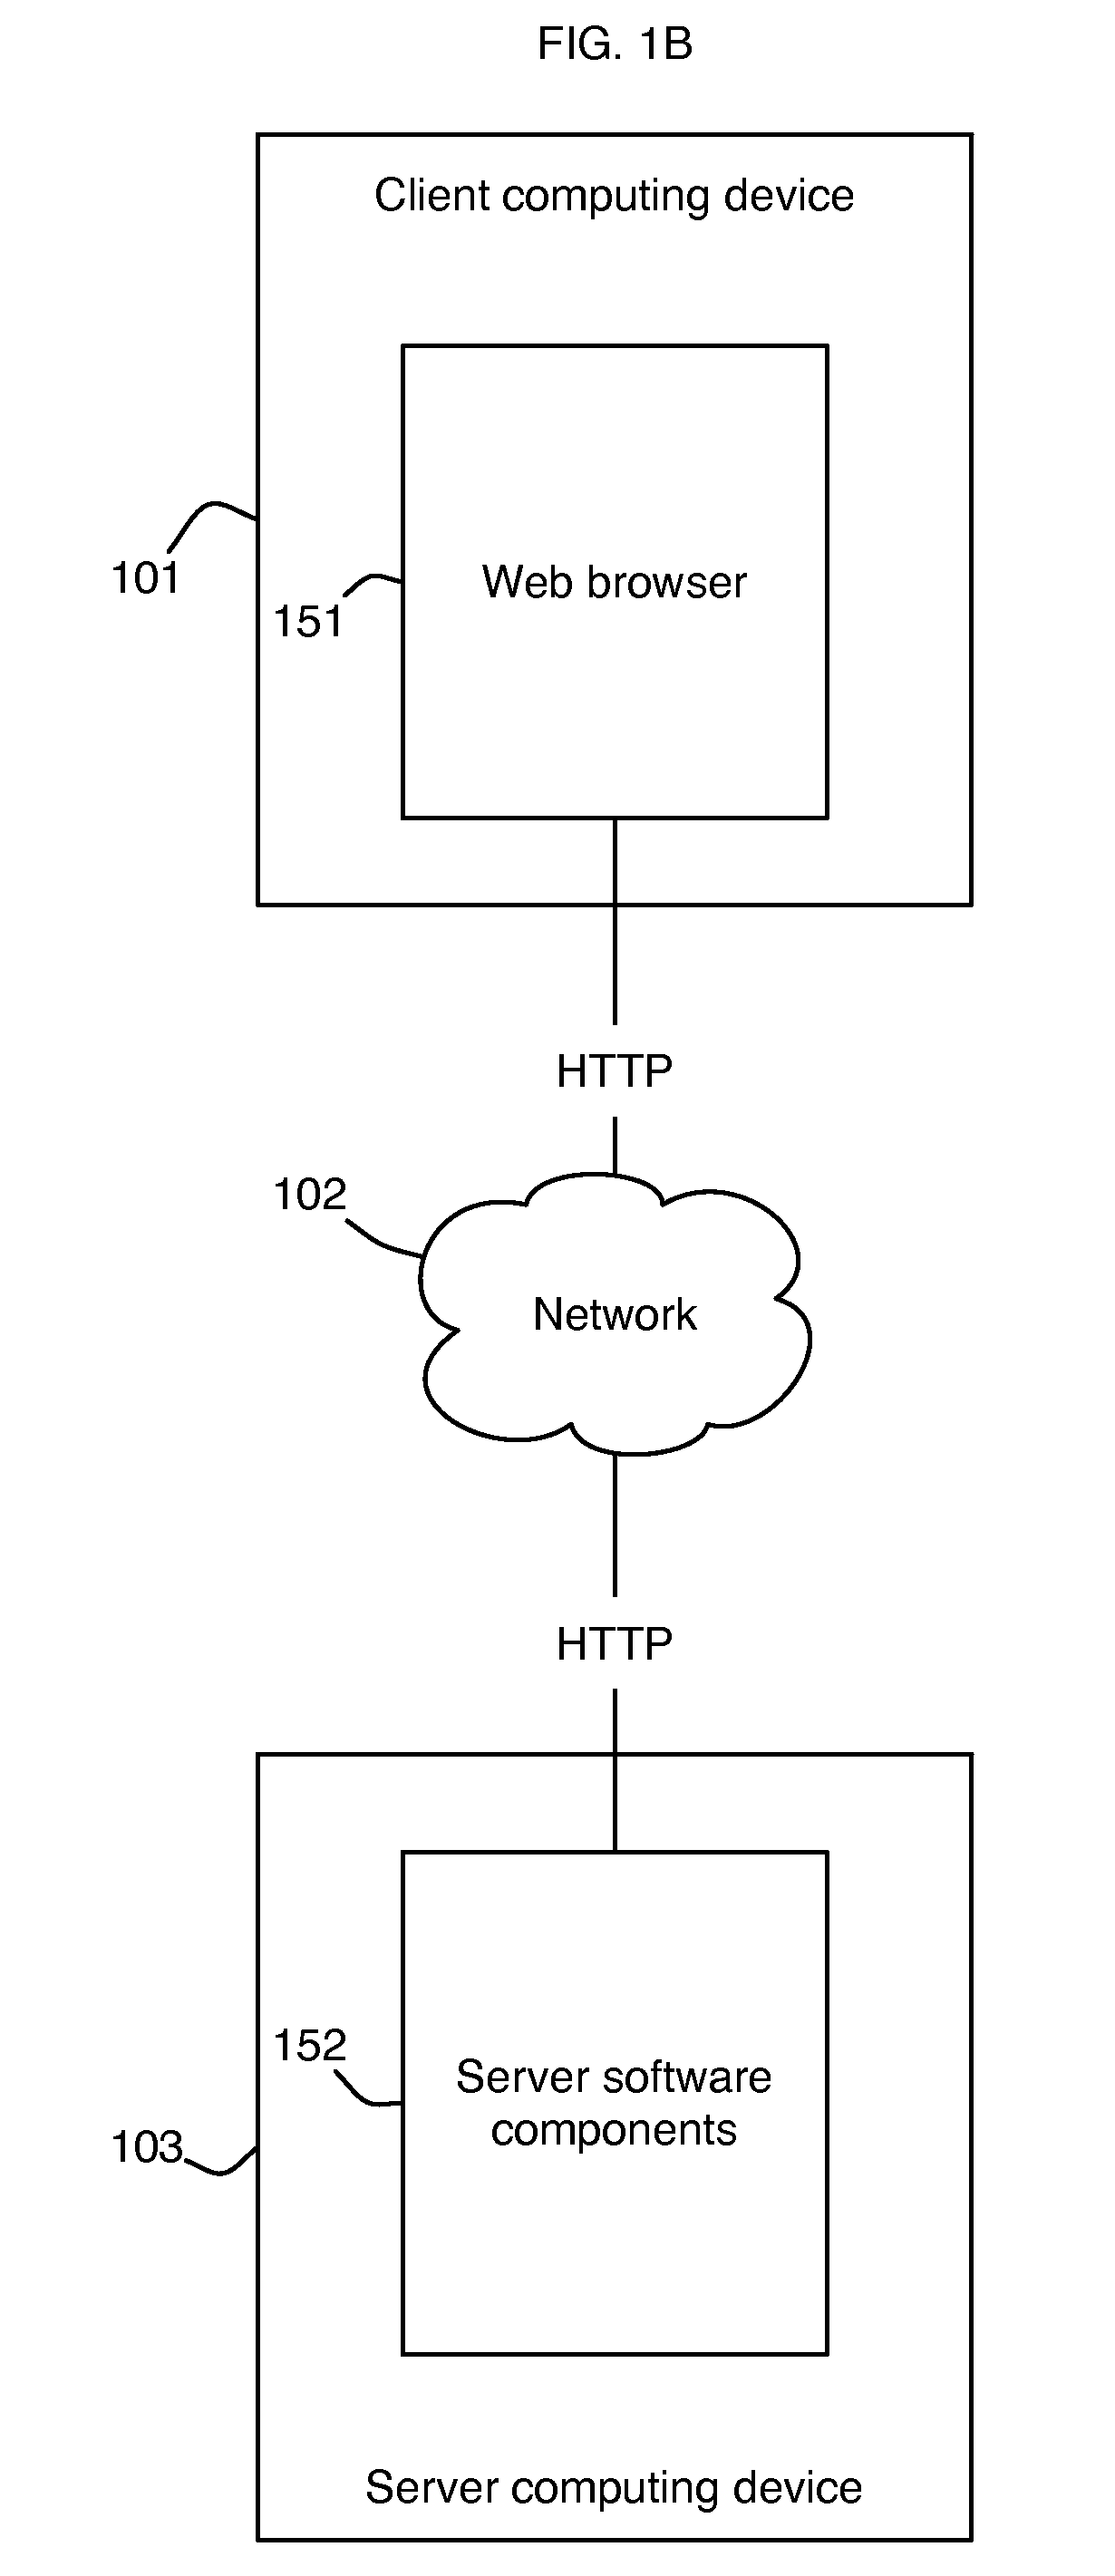 Method and System for Computer-Based Assessment Including a Search and Select Process